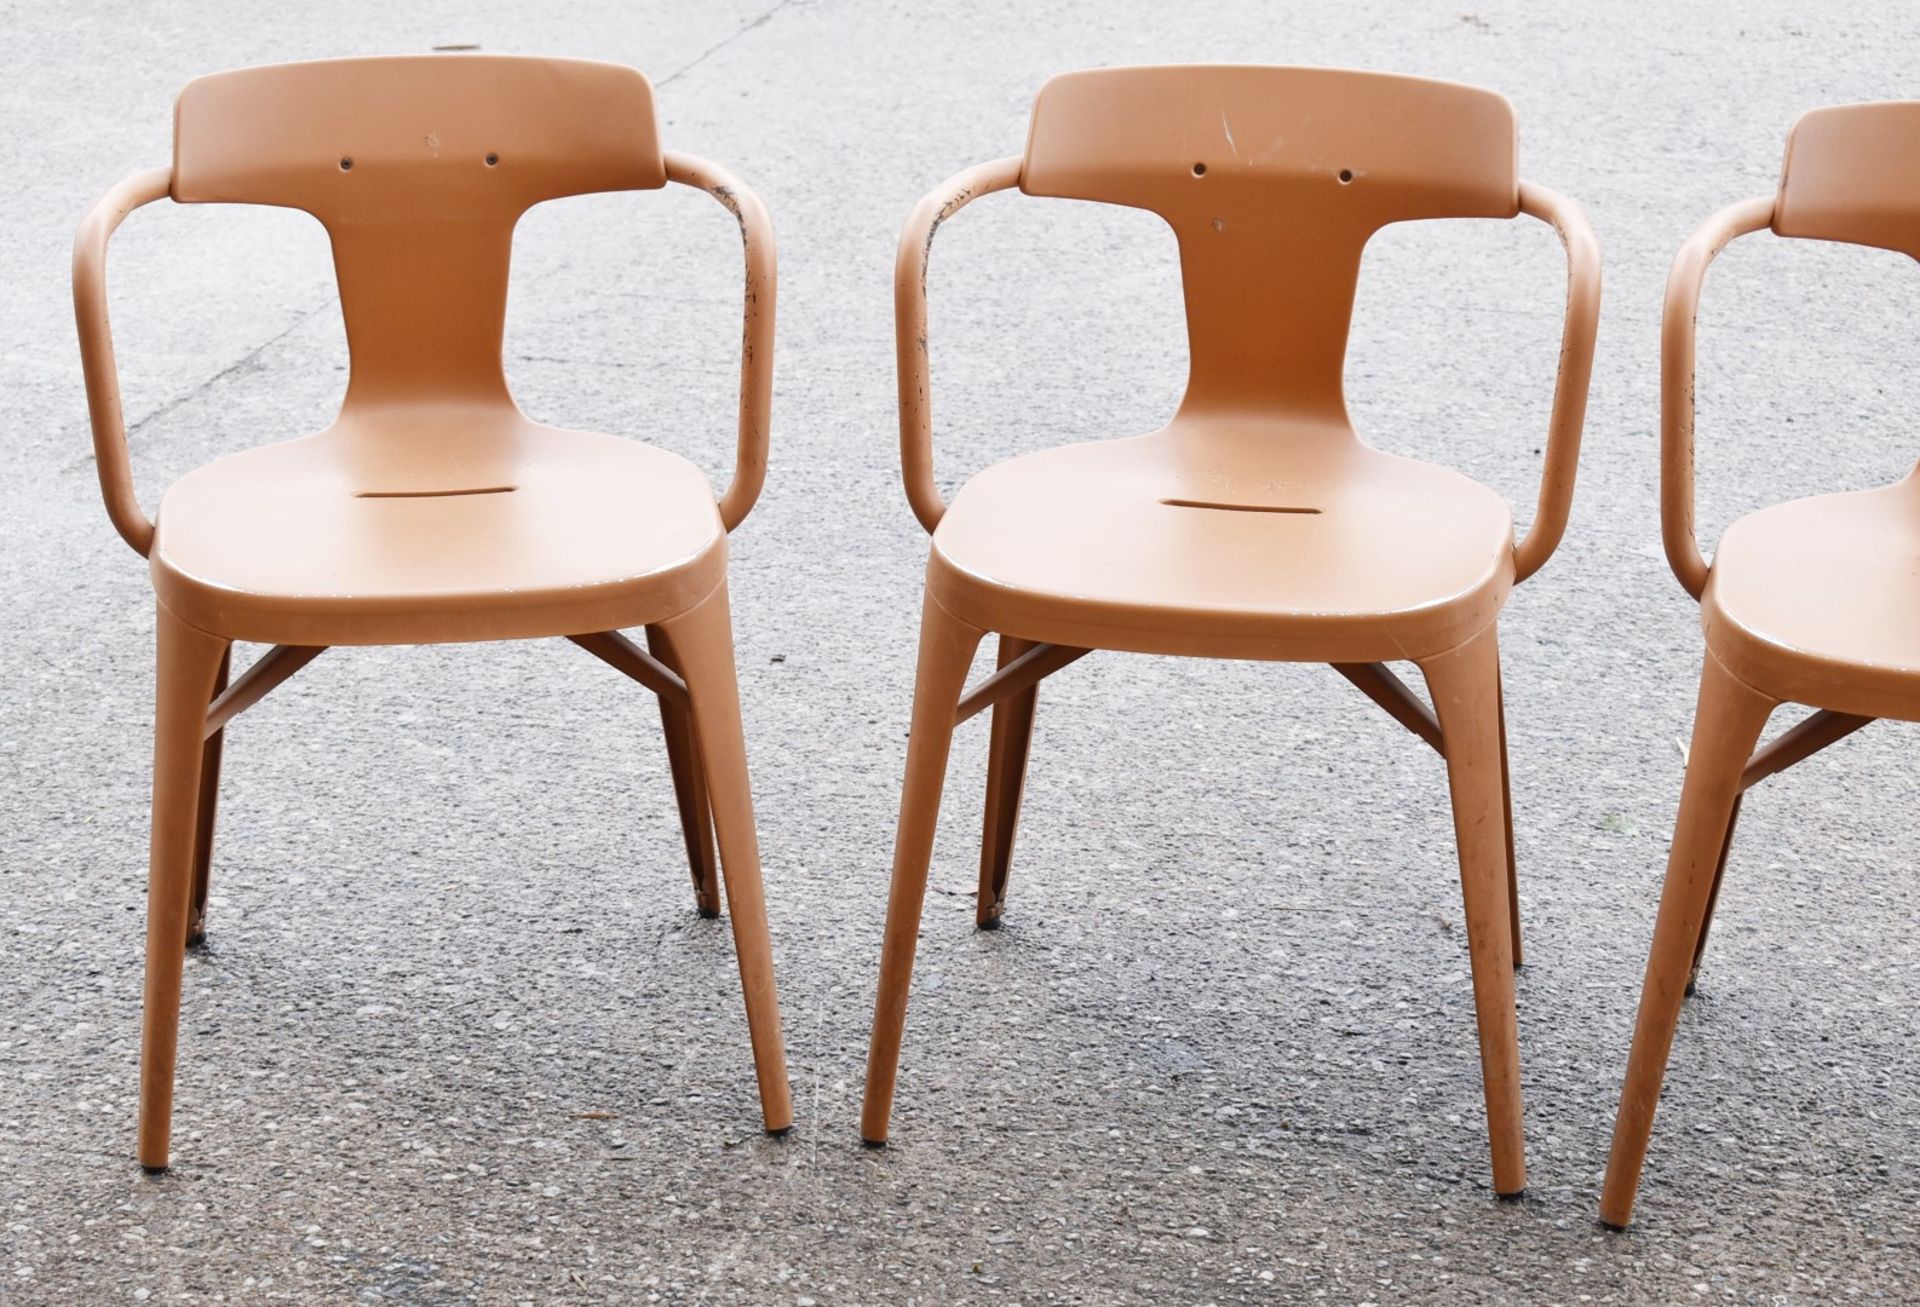 4 x Tolix Outdoor Bistro Stacking Armchairs Designed By Patrick Norguet - RRP £1,548 - Image 3 of 16